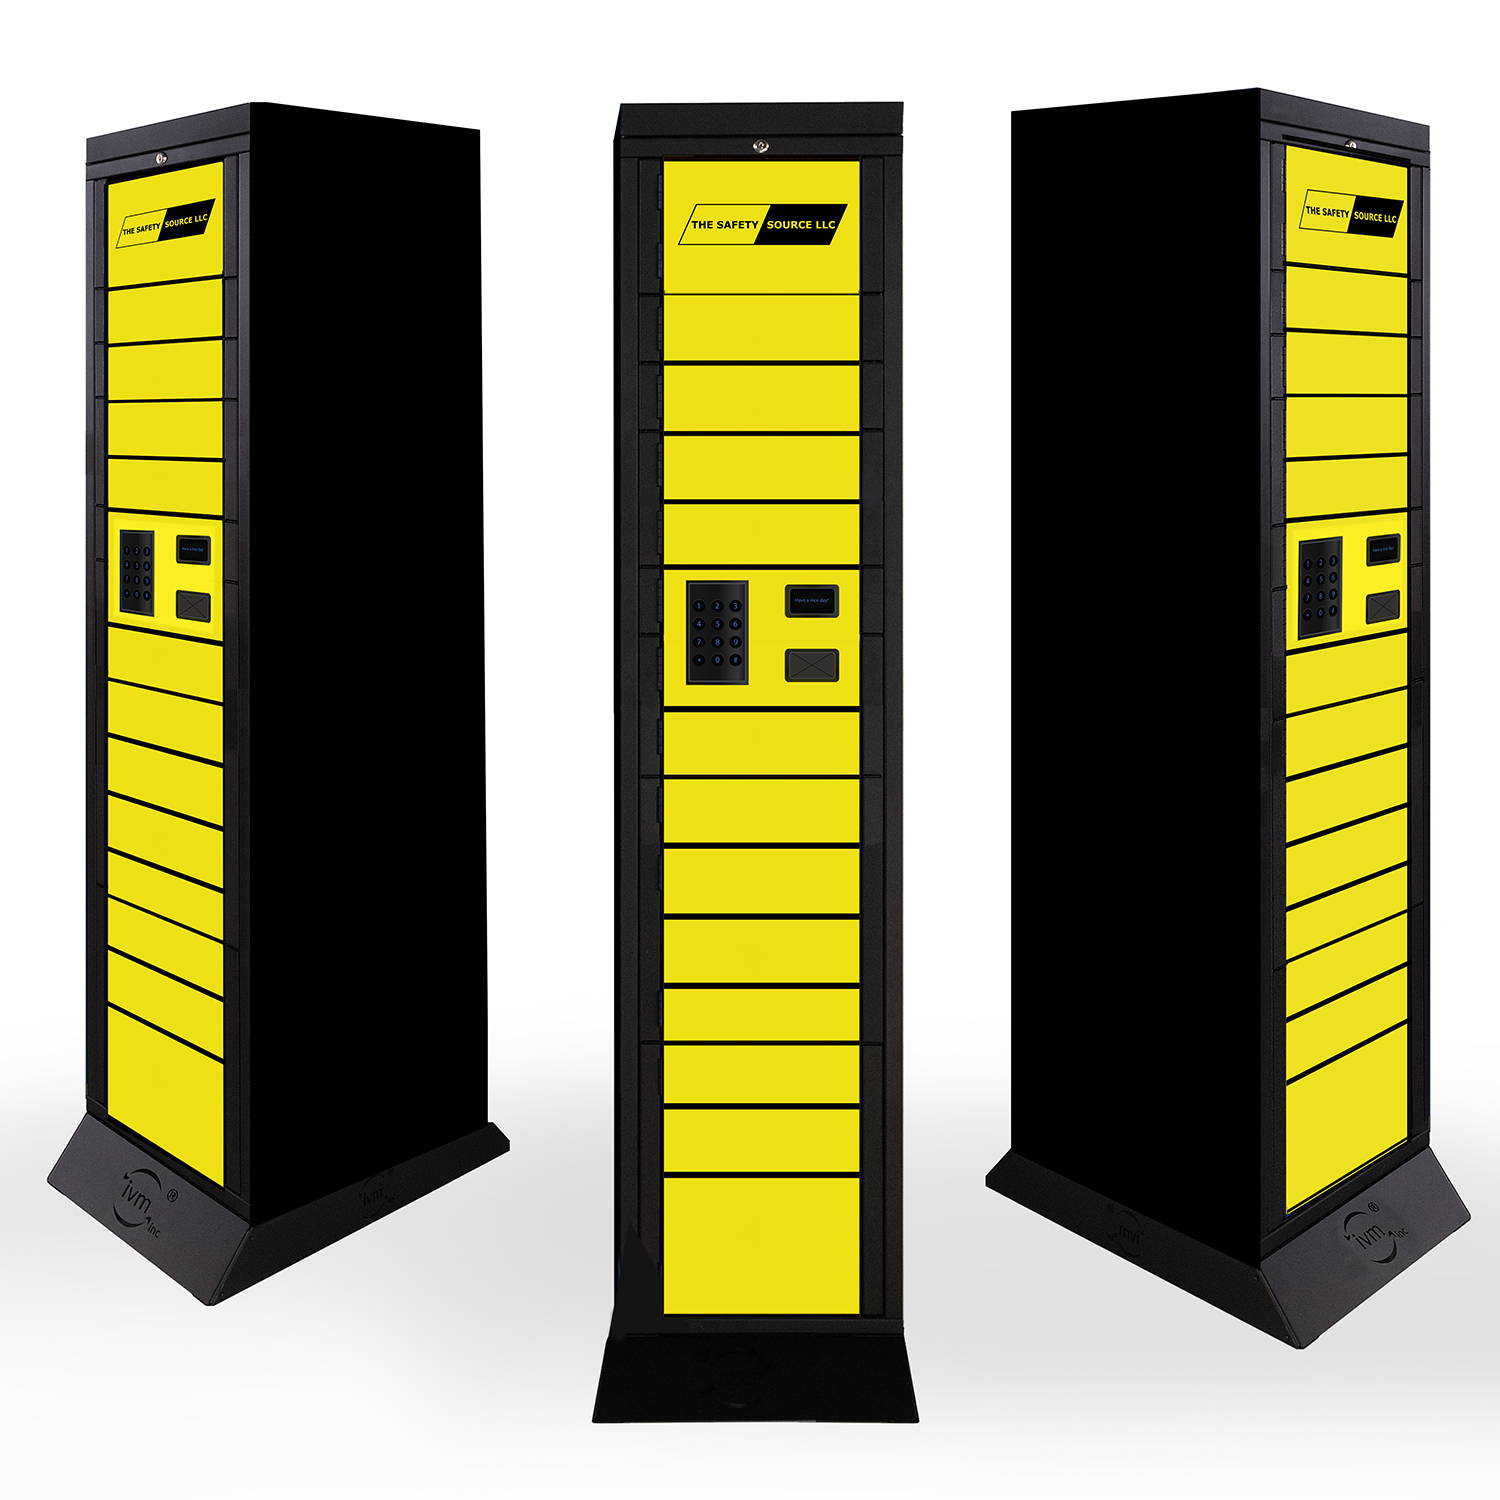 SmartLocker that can be connected to Smartstation PPE Vending machine.